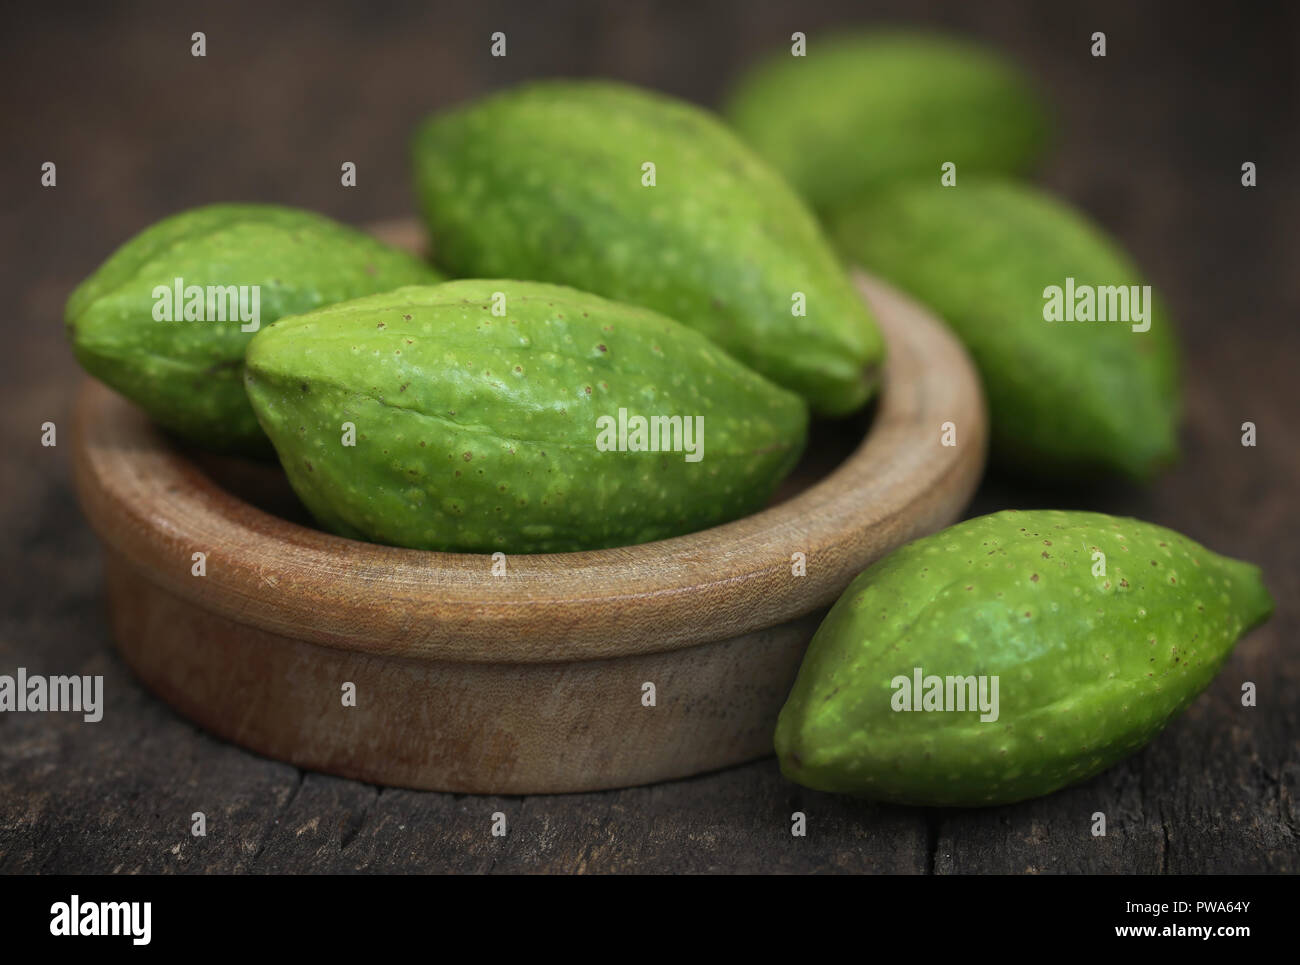 Green haritaki fruits used as herbal medicine in various parts of the world Stock Photo